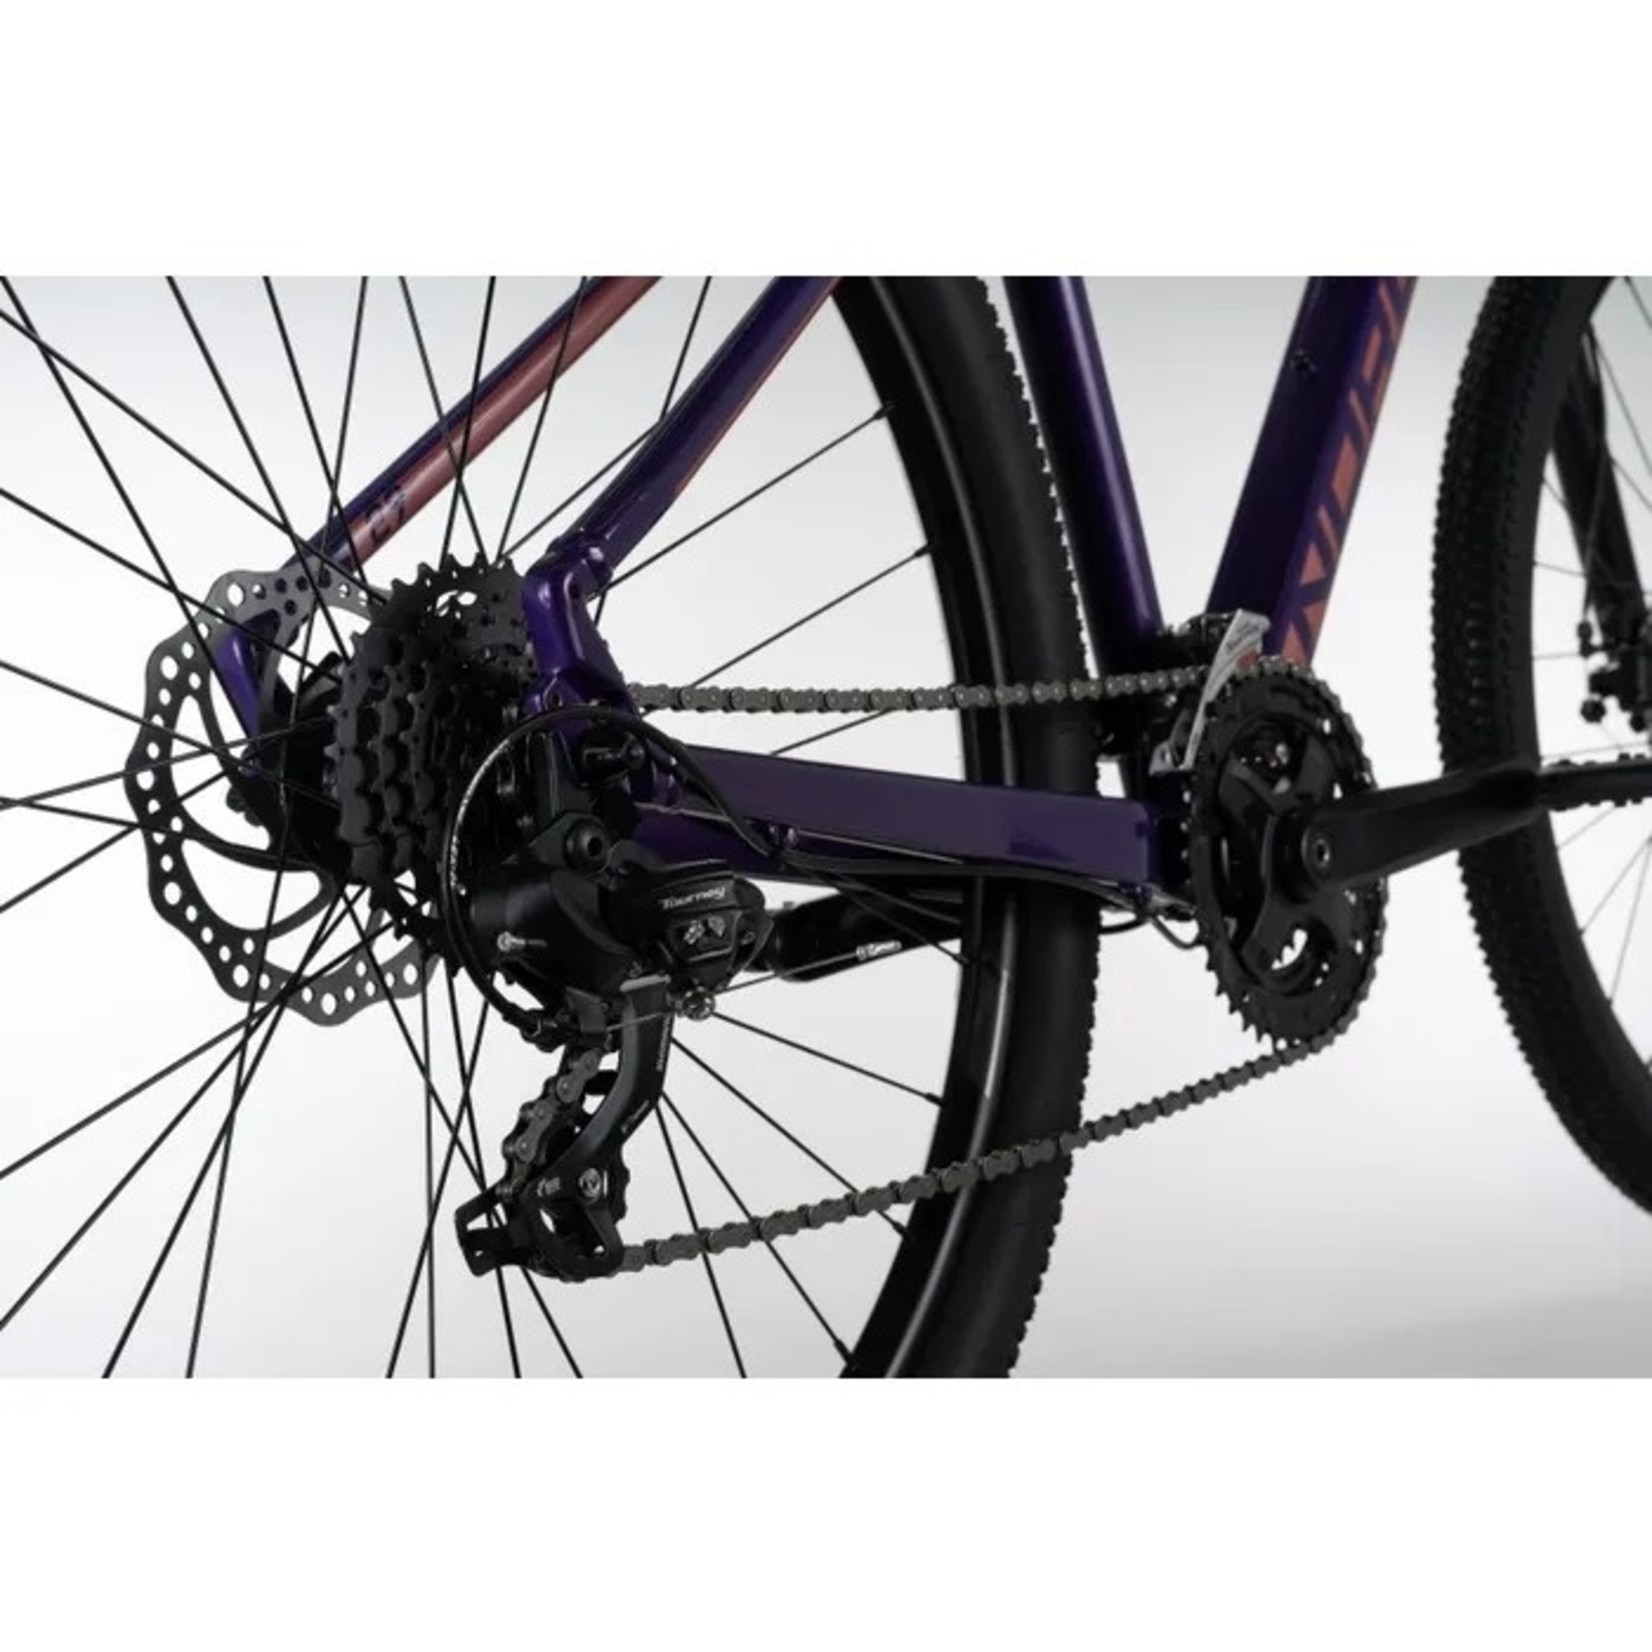 NORCO 21 STORM 5 W LG (29)- ULTRAVIOLET/PINK